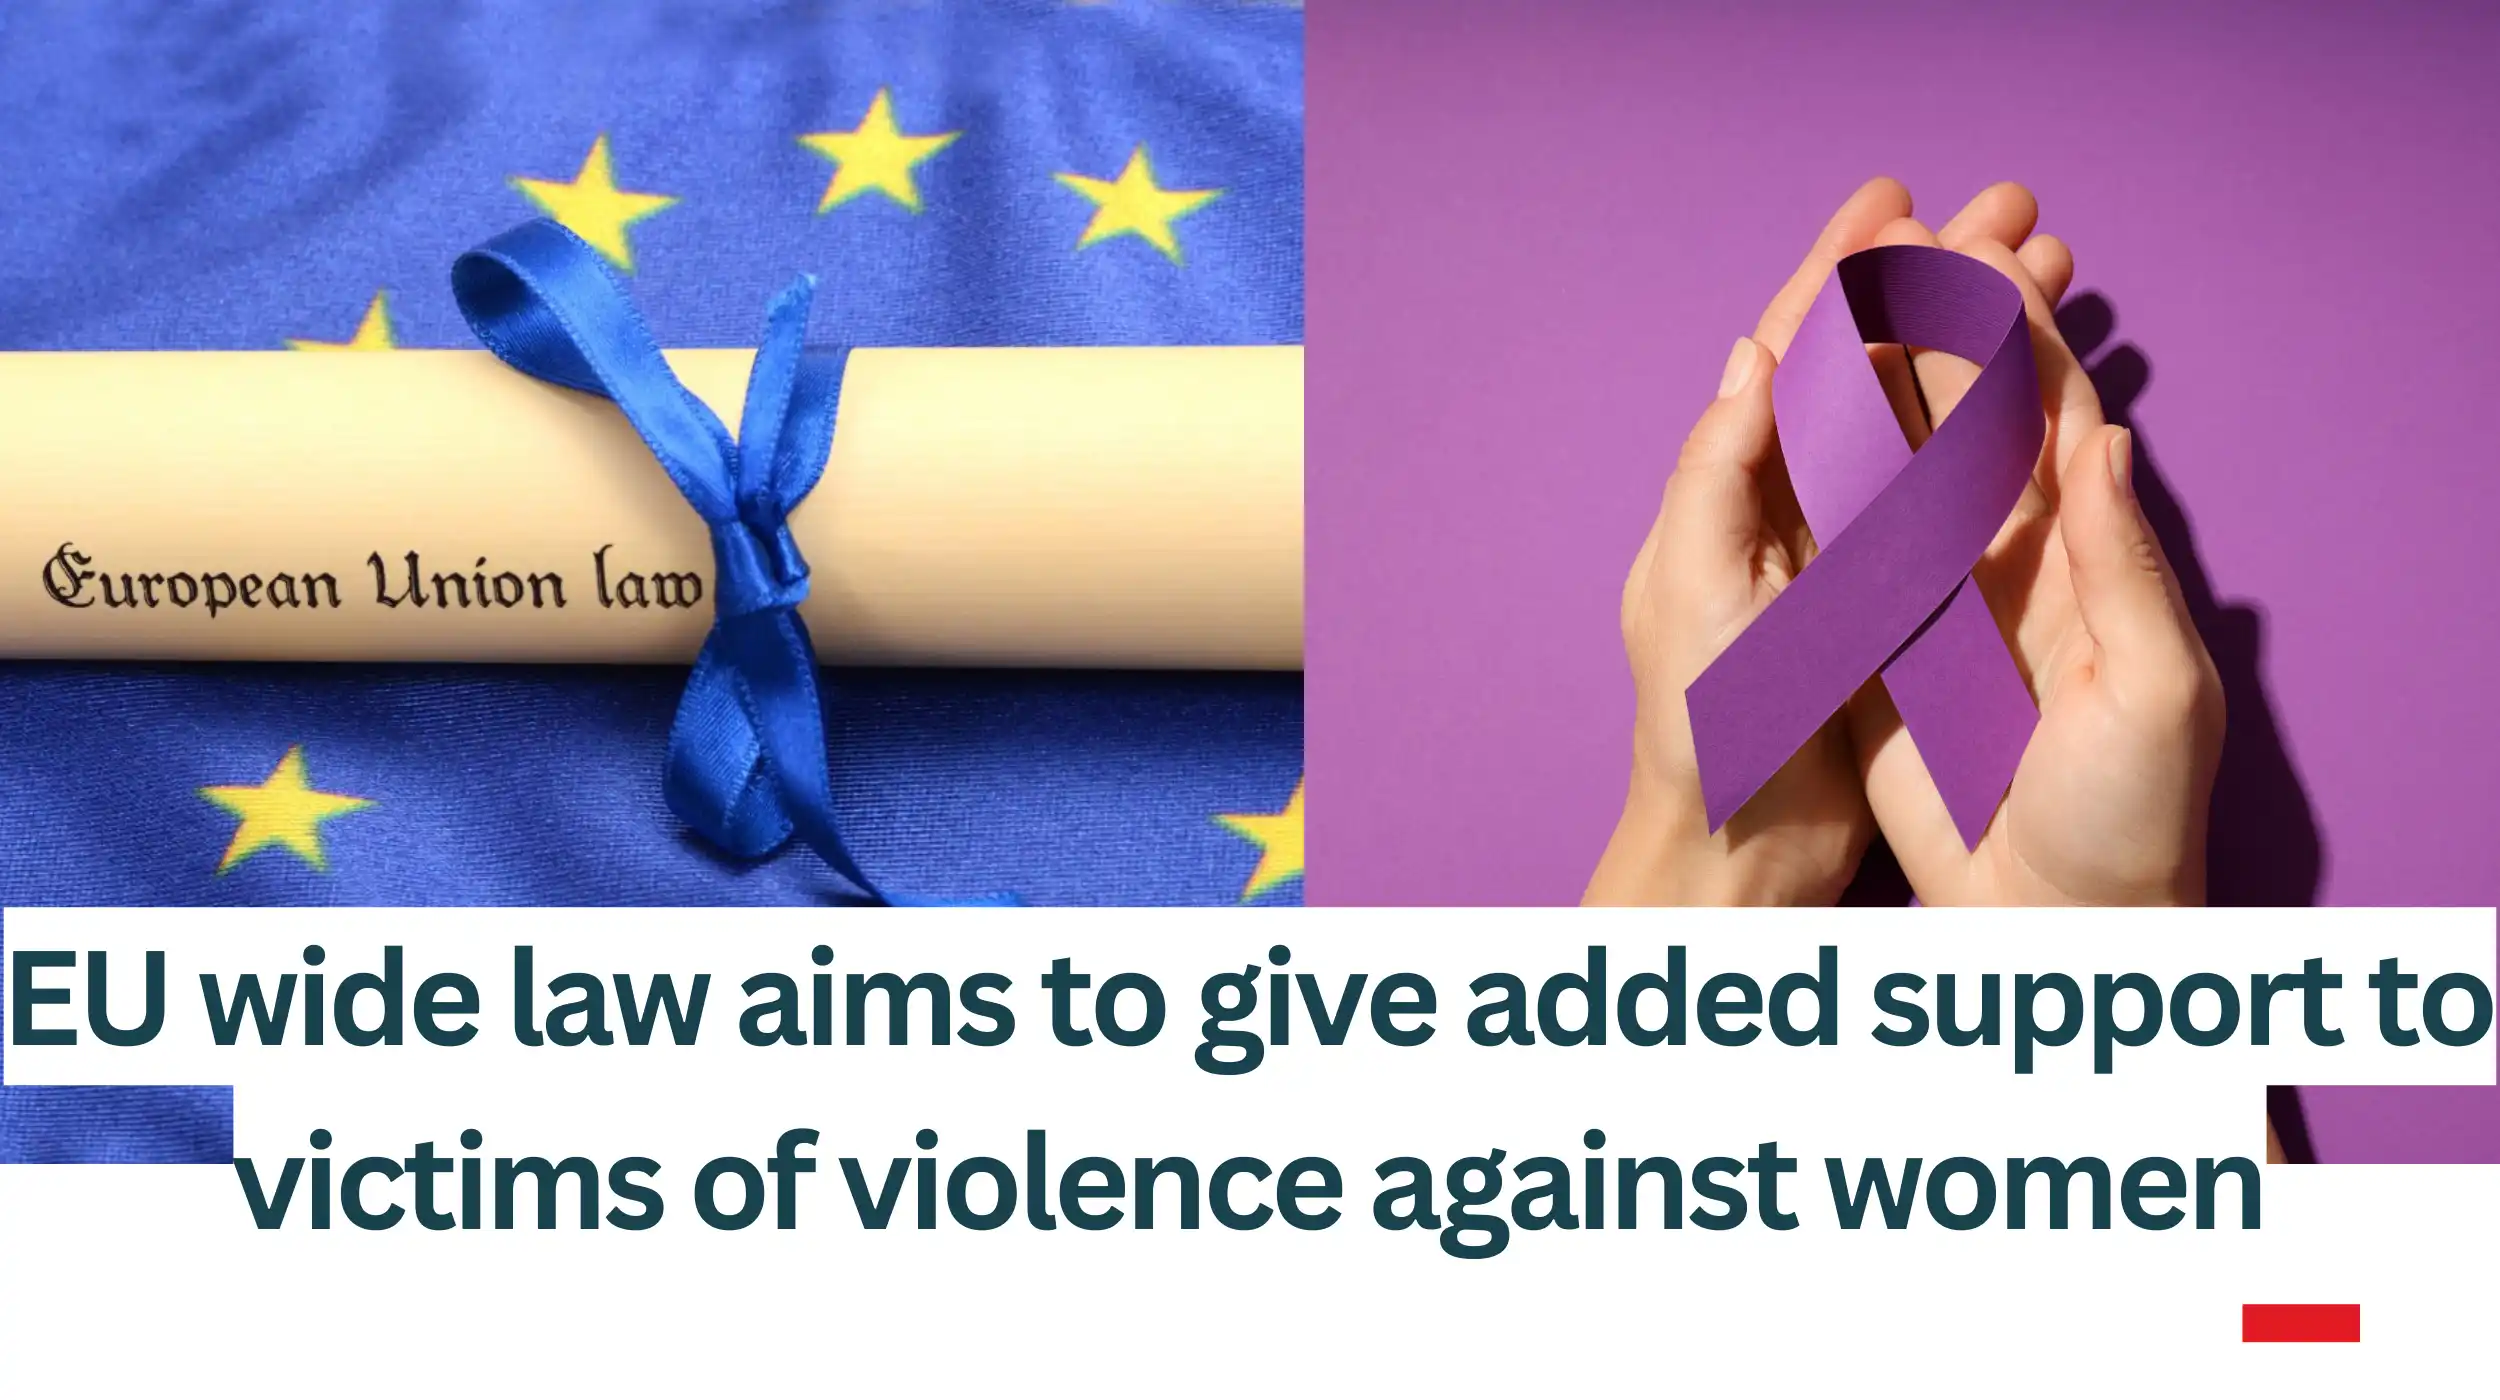 EU-wide-law-aims-to-give-added-support-to-victims-of-violence-against-women